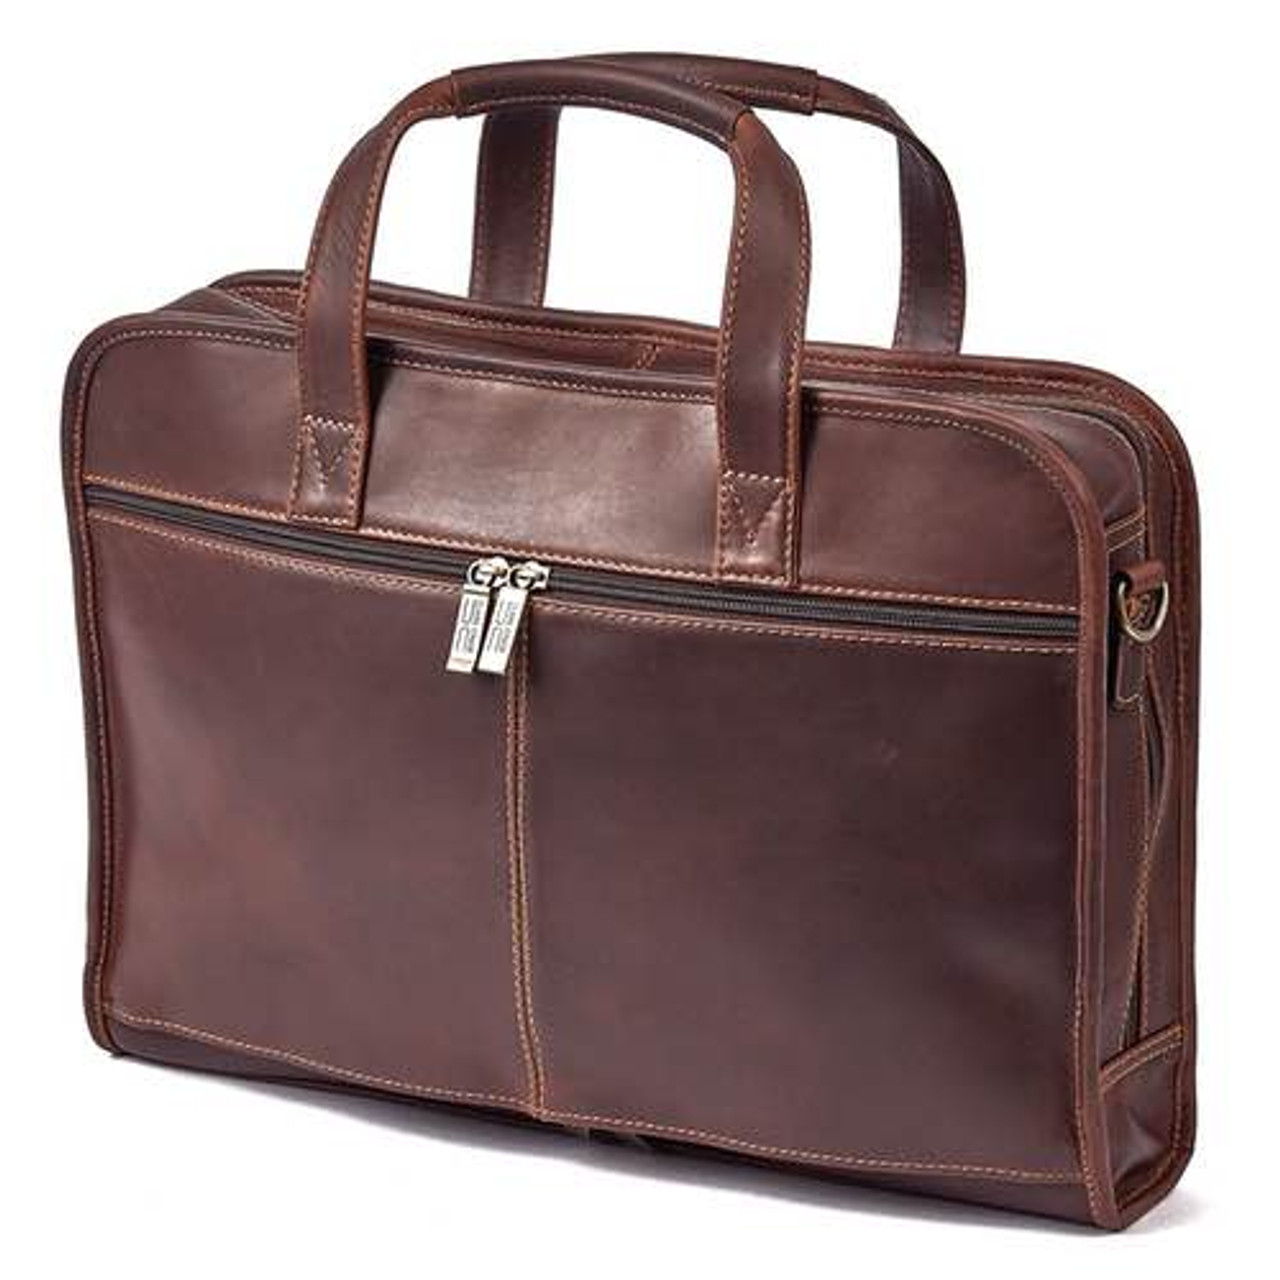 Claire Chase Legendary Professional Briefcase